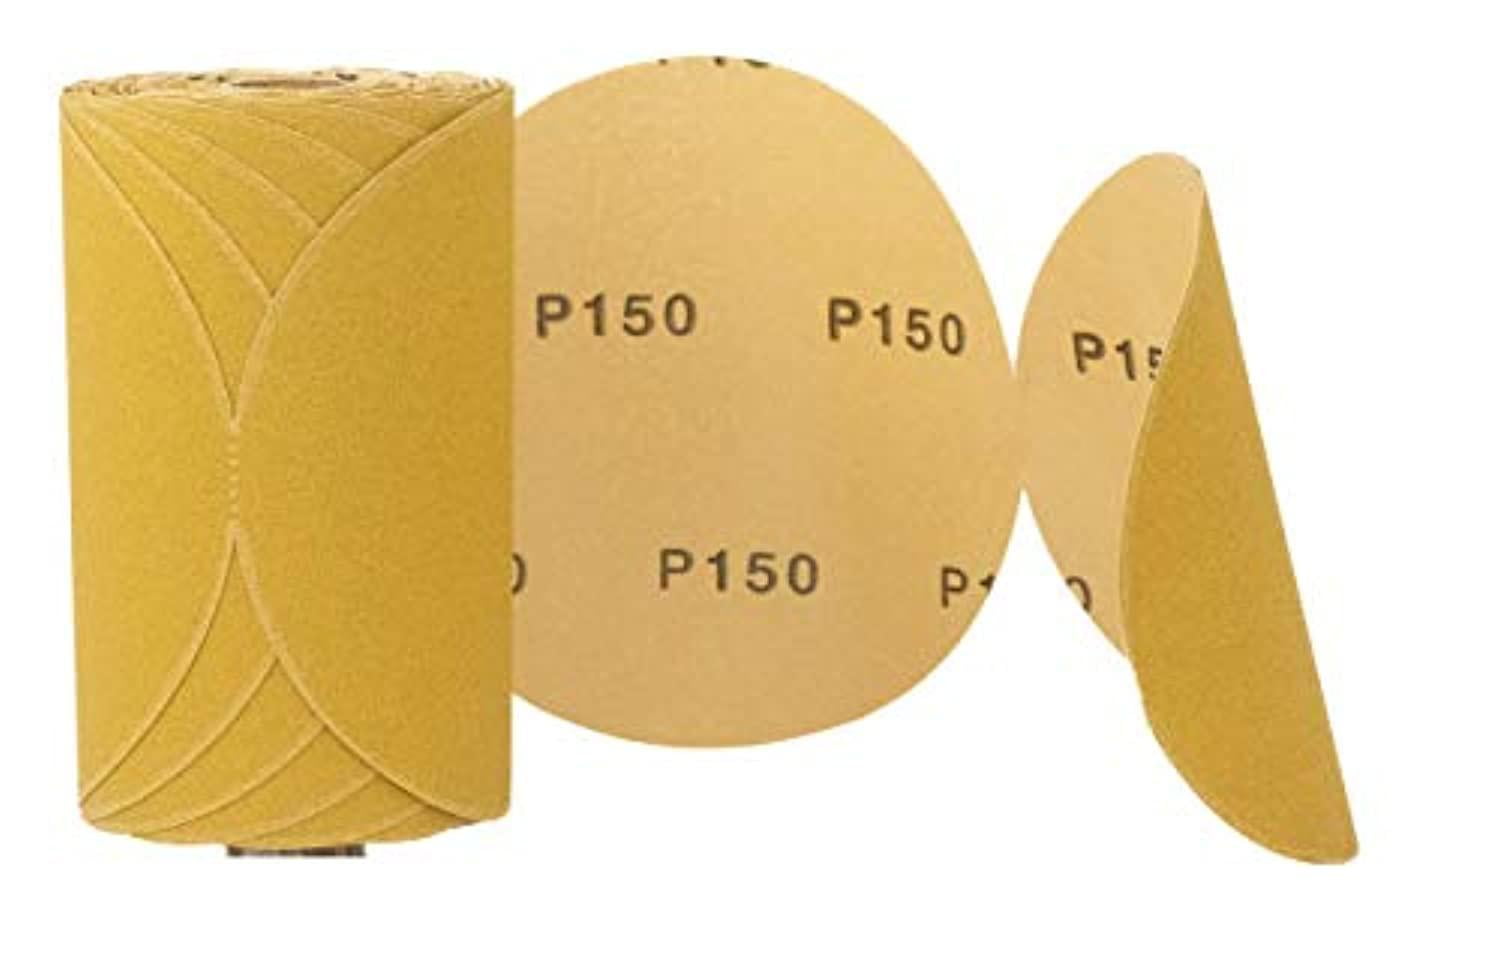 6 Inch, 220 Grit Starcke Premium Gold Sanding Disc Sandpaper Roll Paint PSA Sticky Back No Hole For for Wood Marine Metal Auto Body Repair And Plastics 